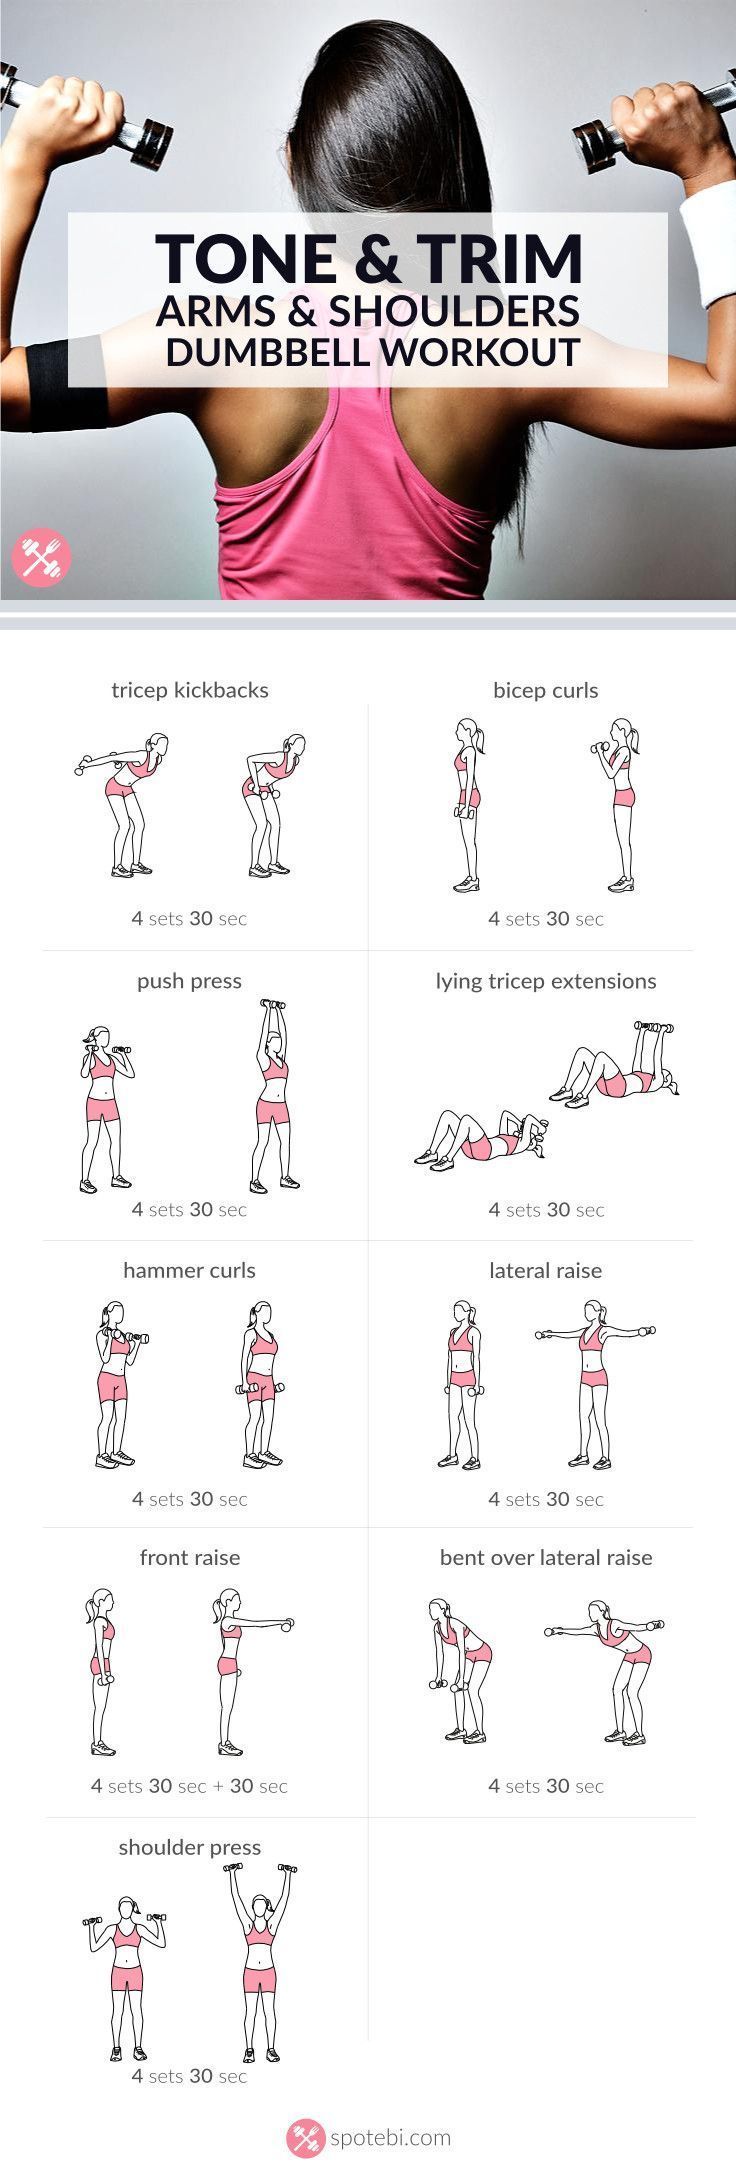 Get rid of arm fat and tone sleek muscles with the help of these dumbbell exercises. Sculpt, tone and firm your biceps, triceps